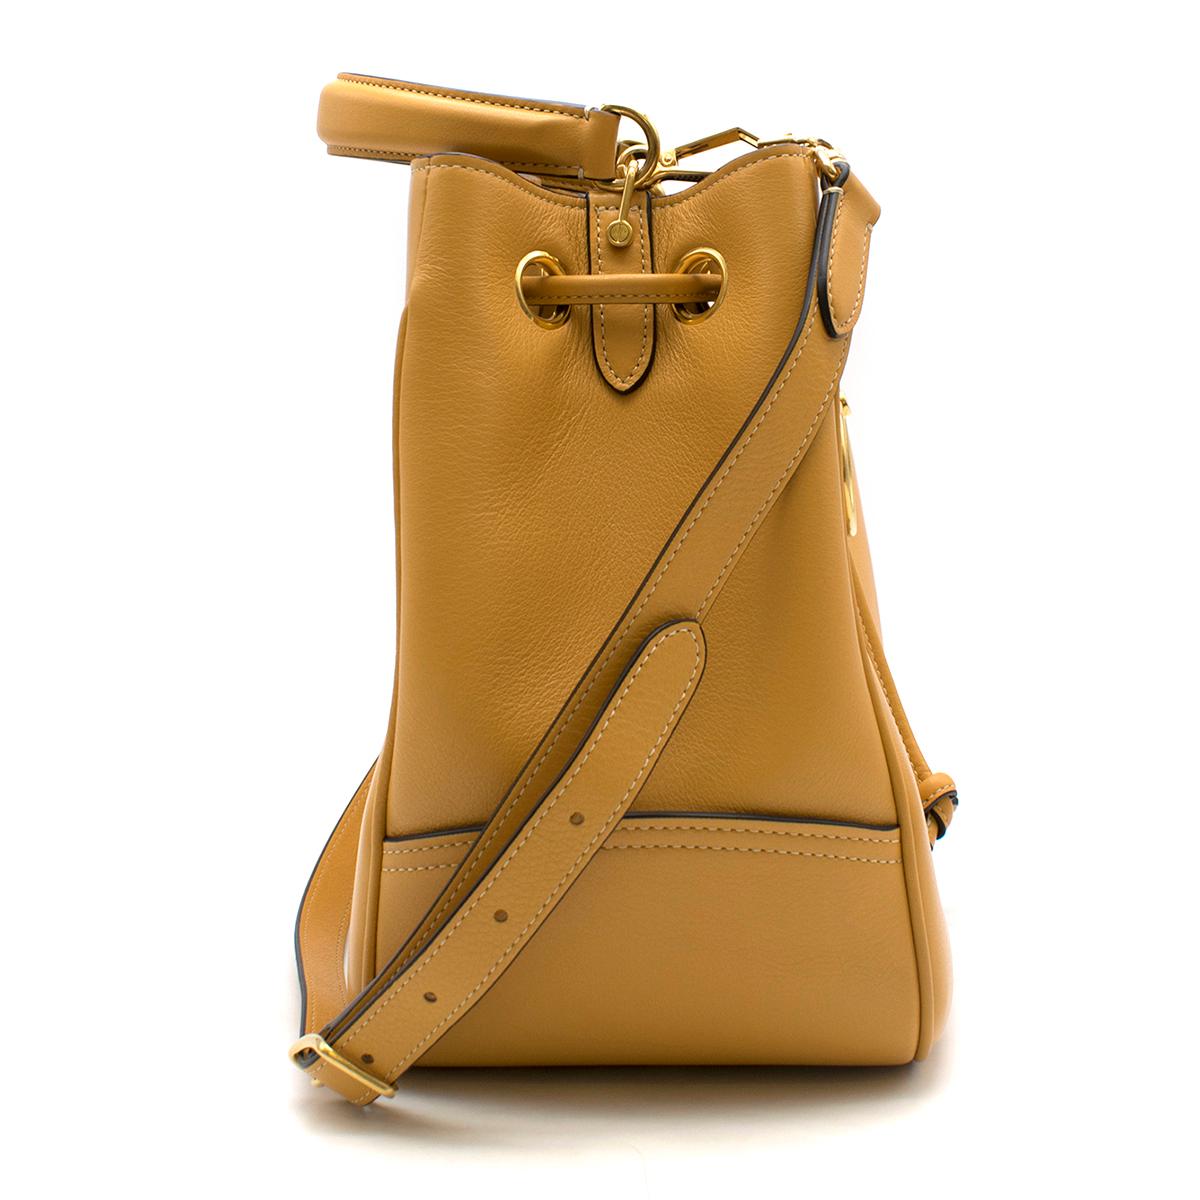 Mulberry Maize Yellow Silky Calf Hampstead Bag

-Leather, mustard yellow
-Gold hardware
-Interior gold zip pocket
-Navy blue canvas lining
-Removable and adjustable shoulder strap
-Comes with original dust bag

Please note, these items are pre-owned